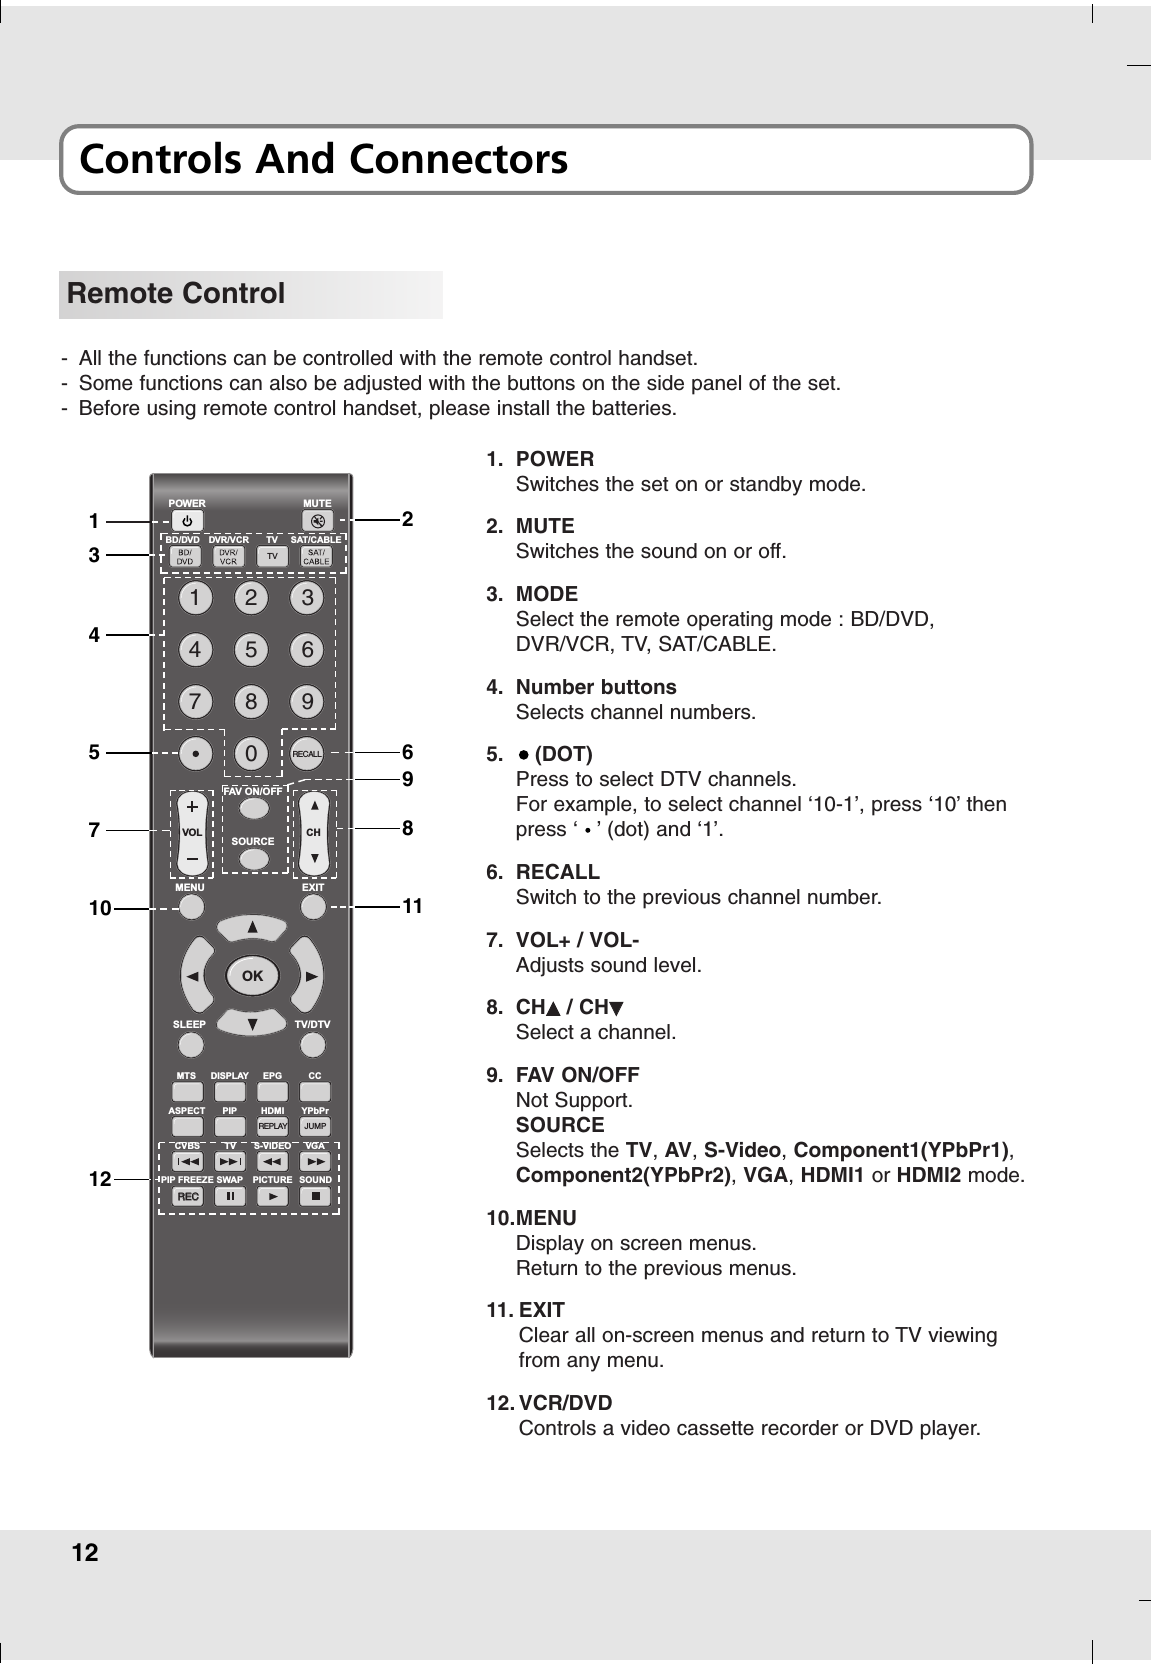 12Controls And ConnectorsRemote Control-All the functions can be controlled with the remote control handset.-Some functions can also be adjusted with the buttons on the side panel of the set.-Before using remote control handset, please install the batteries.POWERBD/DVD DVR/VCRFAV ON/OFFSOURCEMENU EXITSLEEP TV/DTVTVTV SAT/CABLEMUTE1234567890RECALLVOL C HOKMTS DISPLAY EPG CCASPECT PIP HDMI YPbPrCVBS TV S-VIDEO VGASWAPPIP FREEZE PICTURE SOUNDREPLAY JUMPRECREC1. POWERSwitches the set on or standby mode.2. MUTESwitches the sound on or off.3. MODESelect the remote operating mode : BD/DVD,DVR/VCR, TV, SAT/CABLE.4. Number buttonsSelects channel numbers.5. (DOT)Press to select DTV channels. For example, to select channel ‘10-1’, press ‘10’ thenpress ‘   ’ (dot) and ‘1’.6. RECALLSwitch to the previous channel number.7. VOL+ / VOL-Adjusts sound level.8. CHDD/ CHEESelect a channel.9. FAV ON/OFFNot Support.SOURCESelects the TV, AV,S-Video, Component1(YPbPr1),Component2(YPbPr2),VGA, HDMI1 or HDMI2 mode.10.MENUDisplay on screen menus.Return to the previous menus.11. EXITClear all on-screen menus and return to TV viewingfrom any menu.12. VCR/DVDControls a video cassette recorder or DVD player.143571012269811